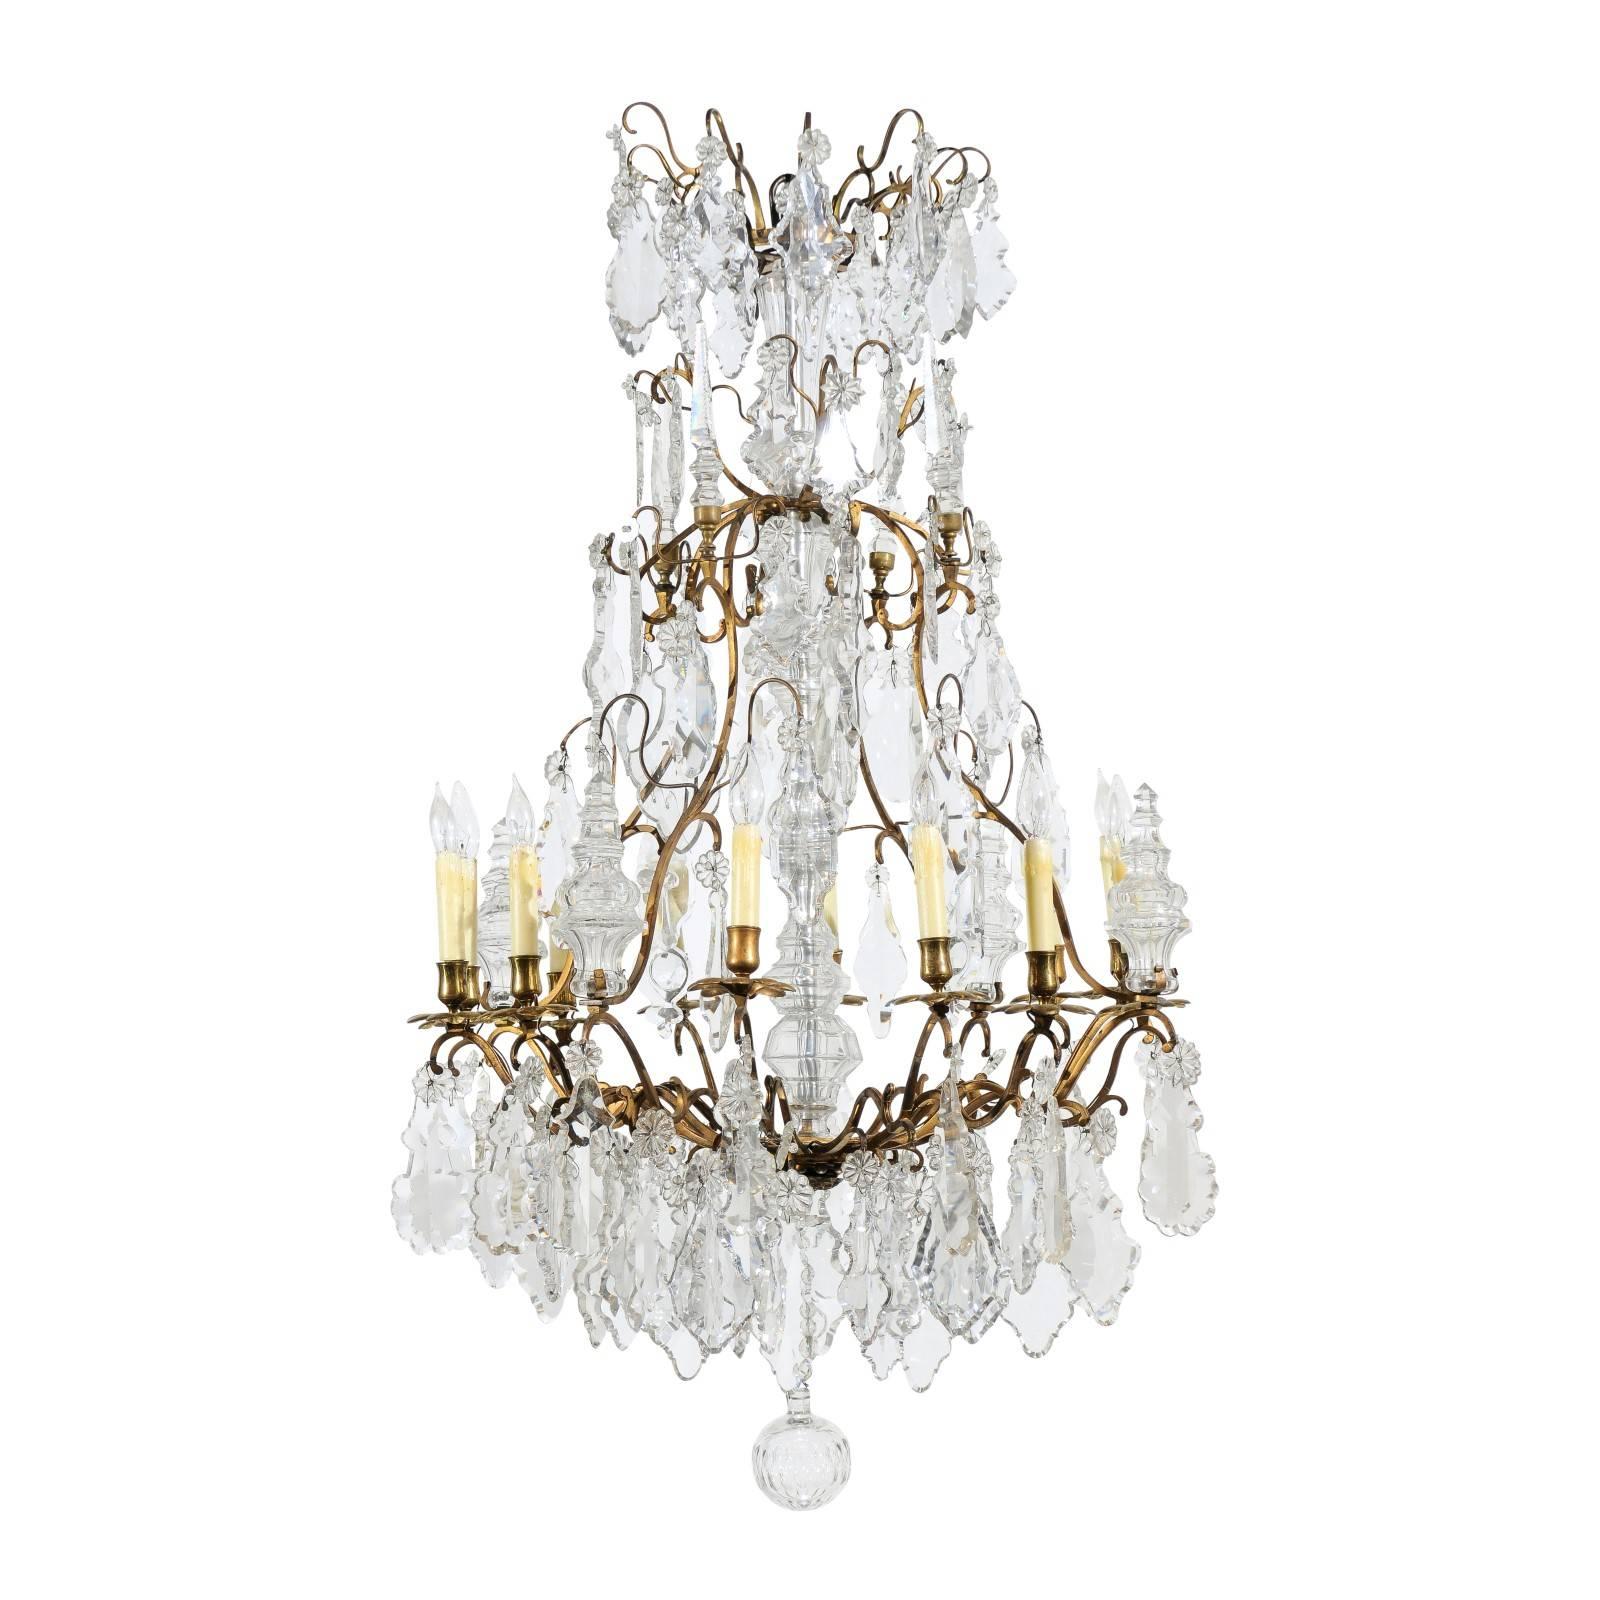 Crystal & Bronze Louis XV Style Chandelier with 12 Lights, 19th Century France For Sale